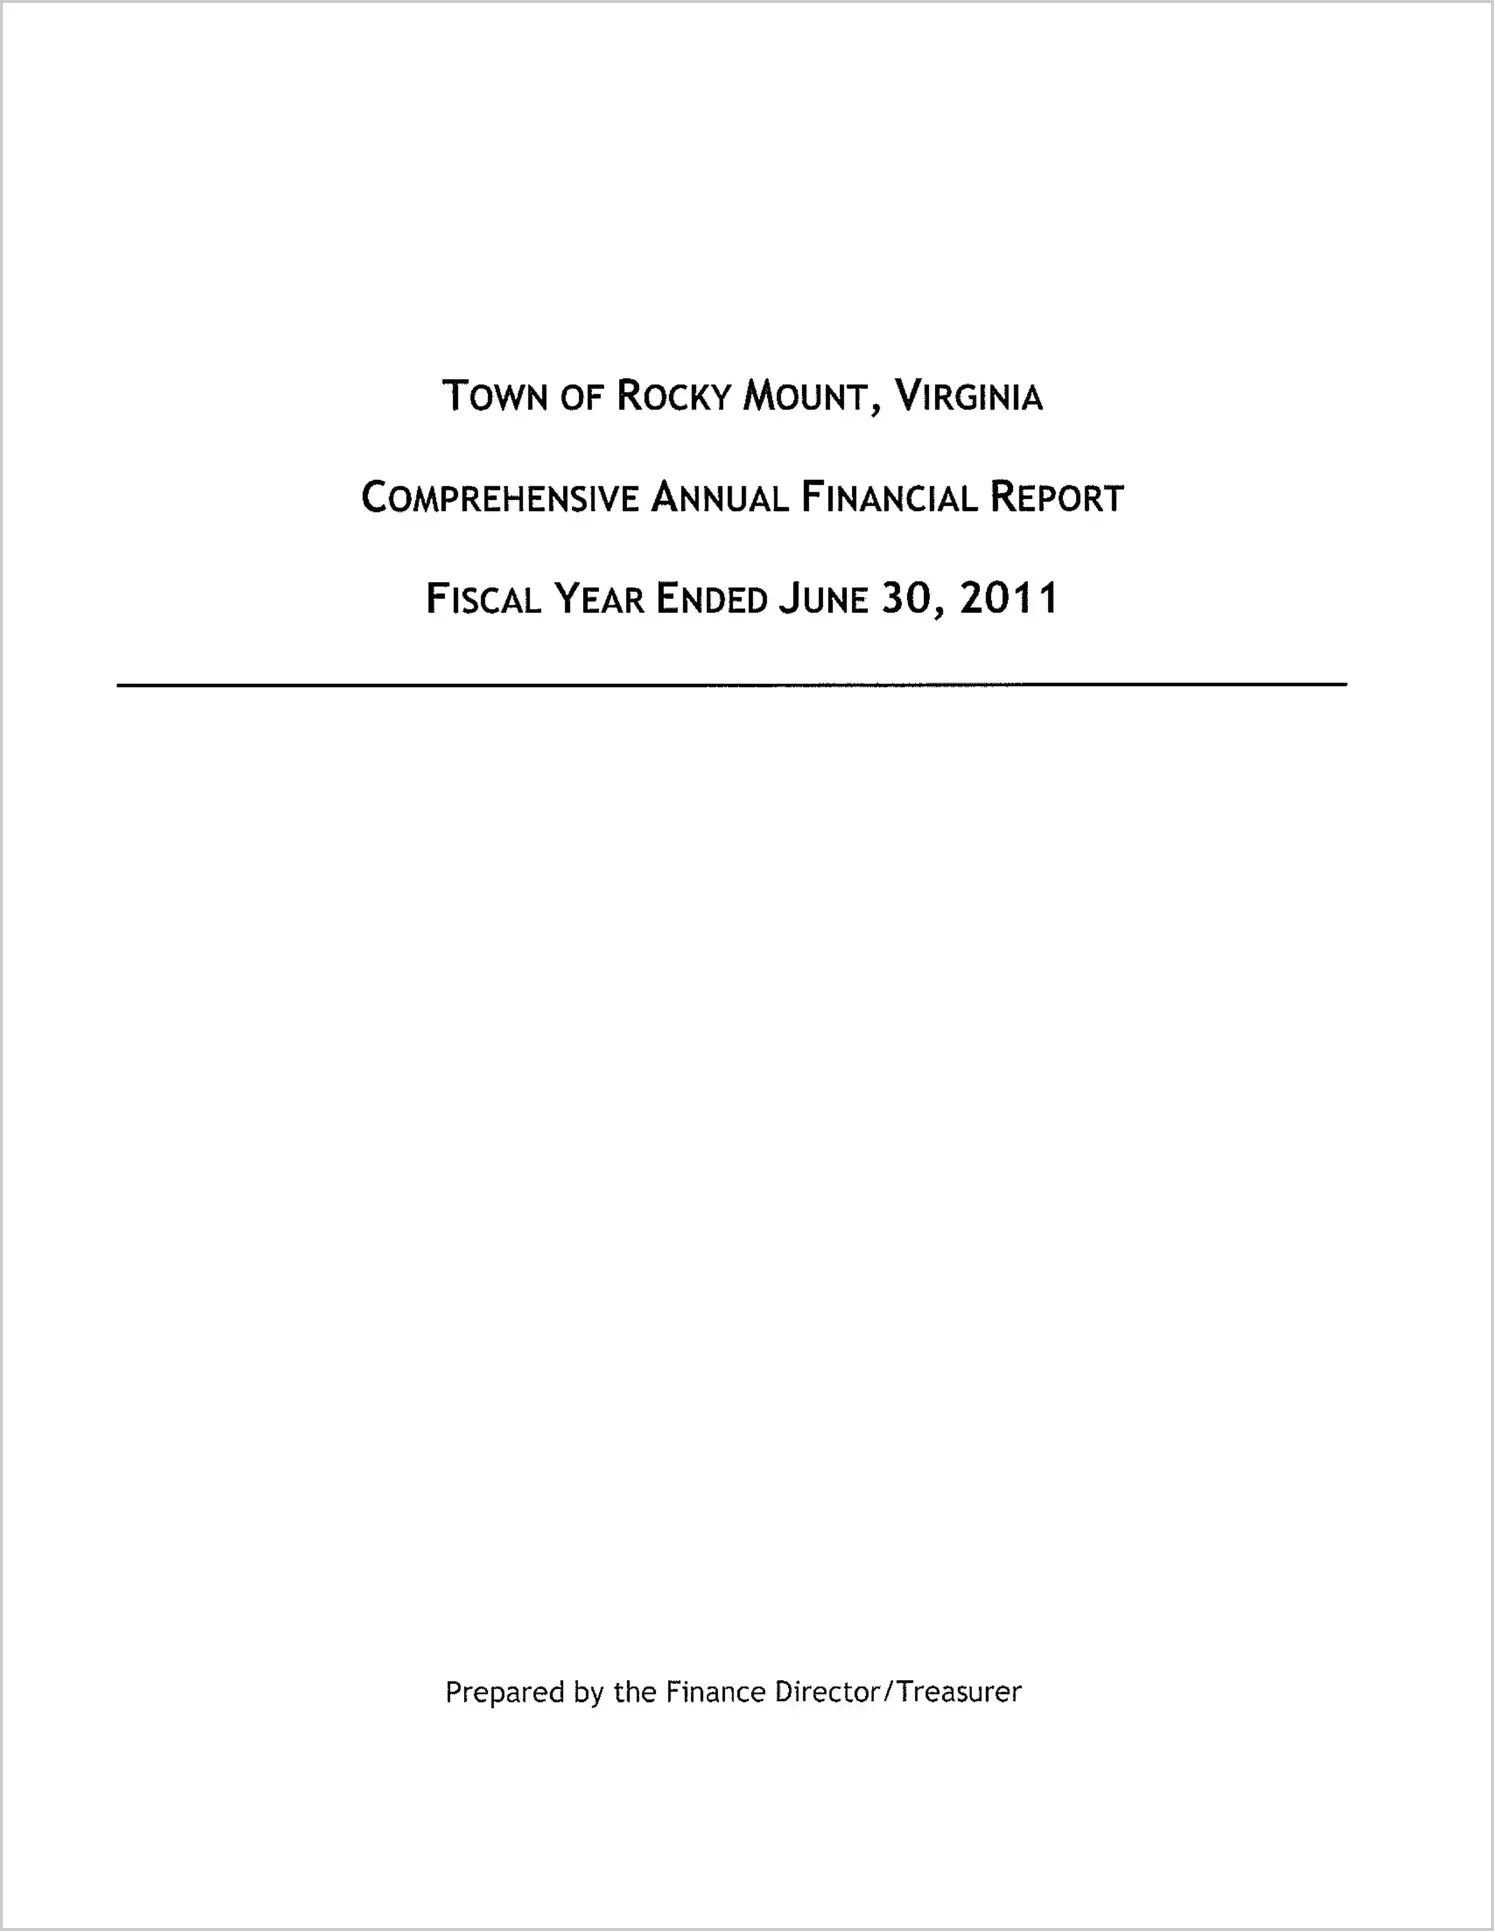 2011 Annual Financial Report for Town of Rocky Mount